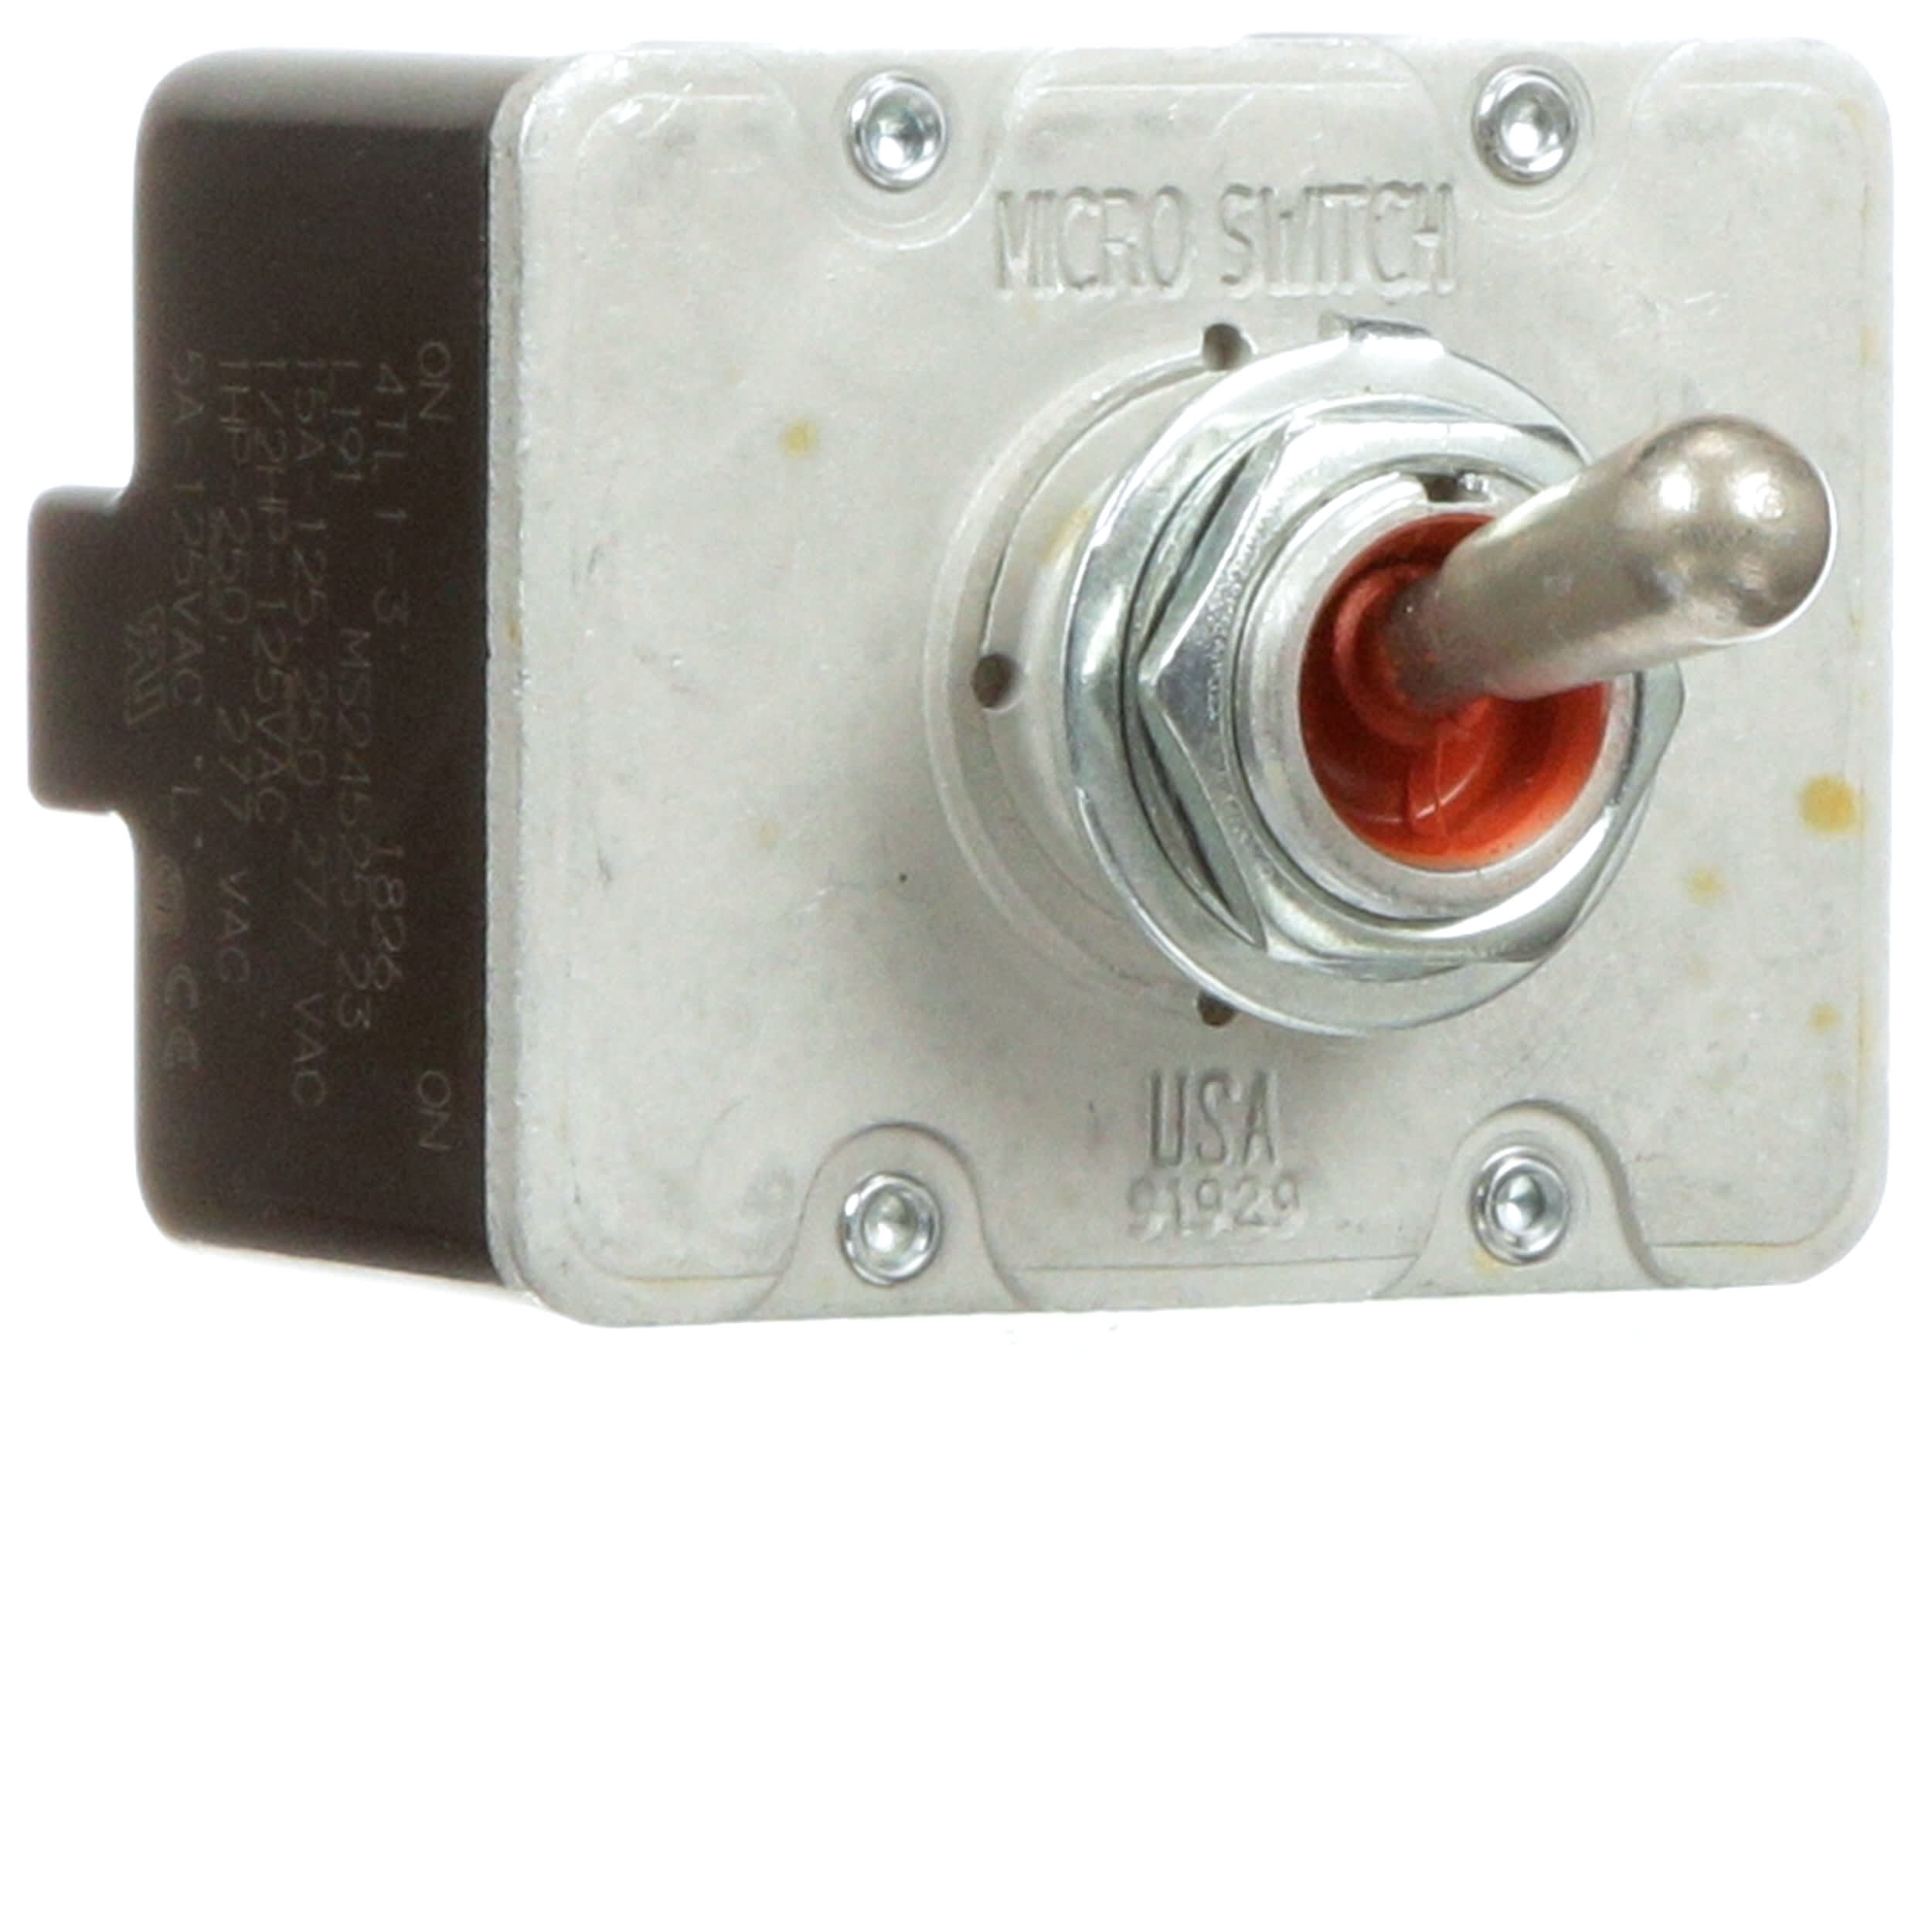 2TL1-3 MS24524-23 HONEYWELL MICRO SWITCH DPDT TOGGLE SWITCH NEW IN BAG 